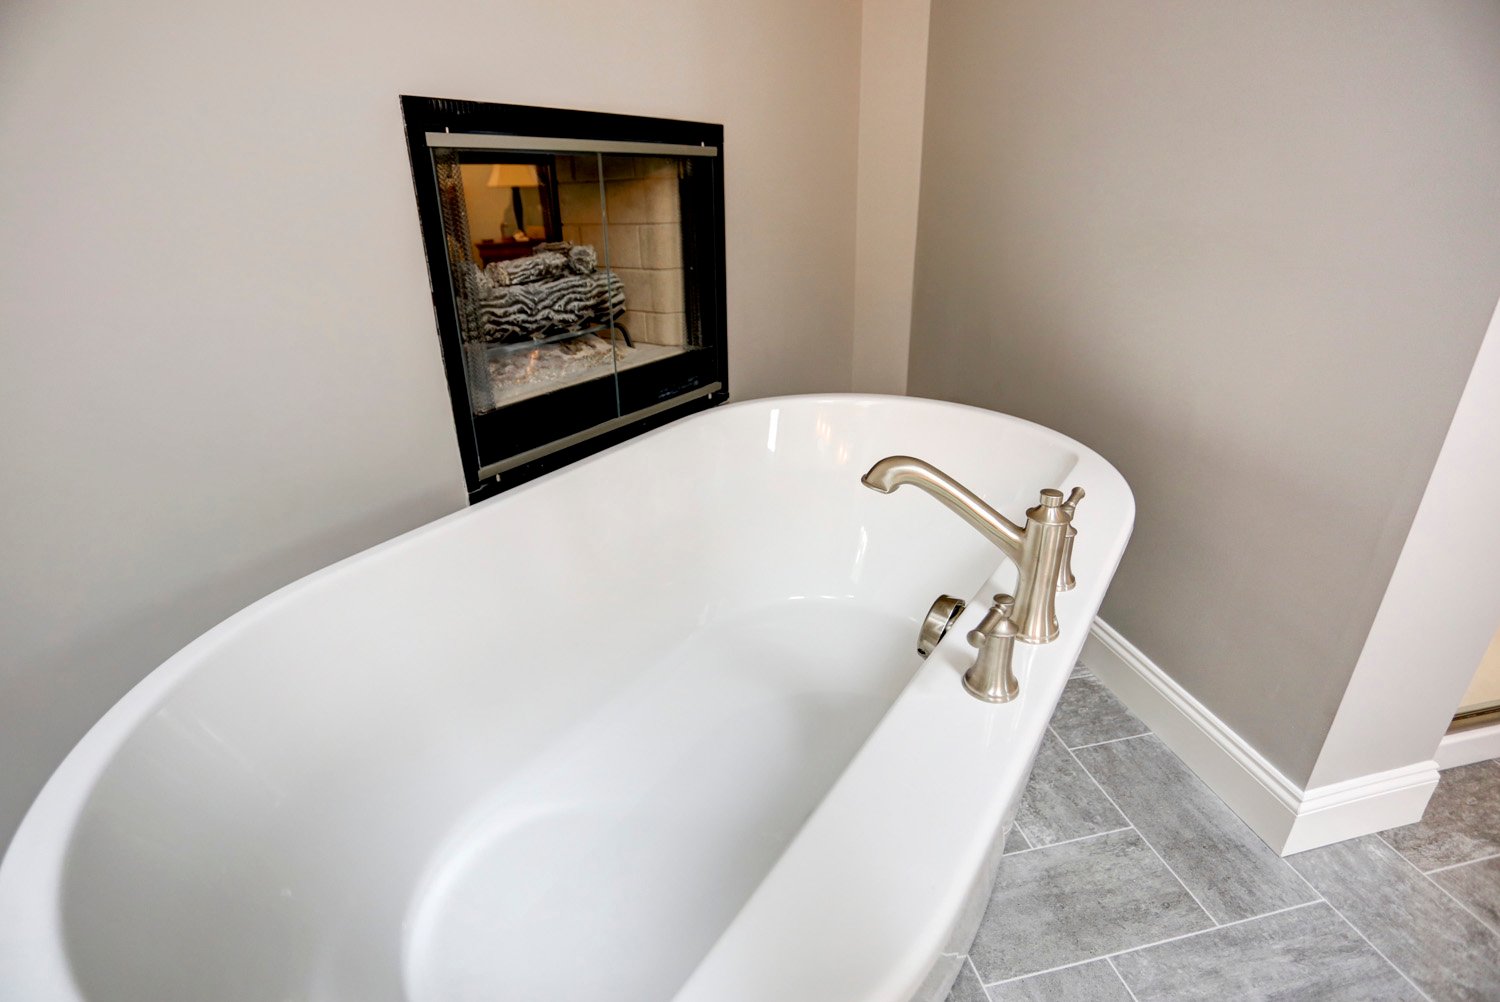 Freestanding tub by fireplace in Manheim Township Master Bathroom Remodel